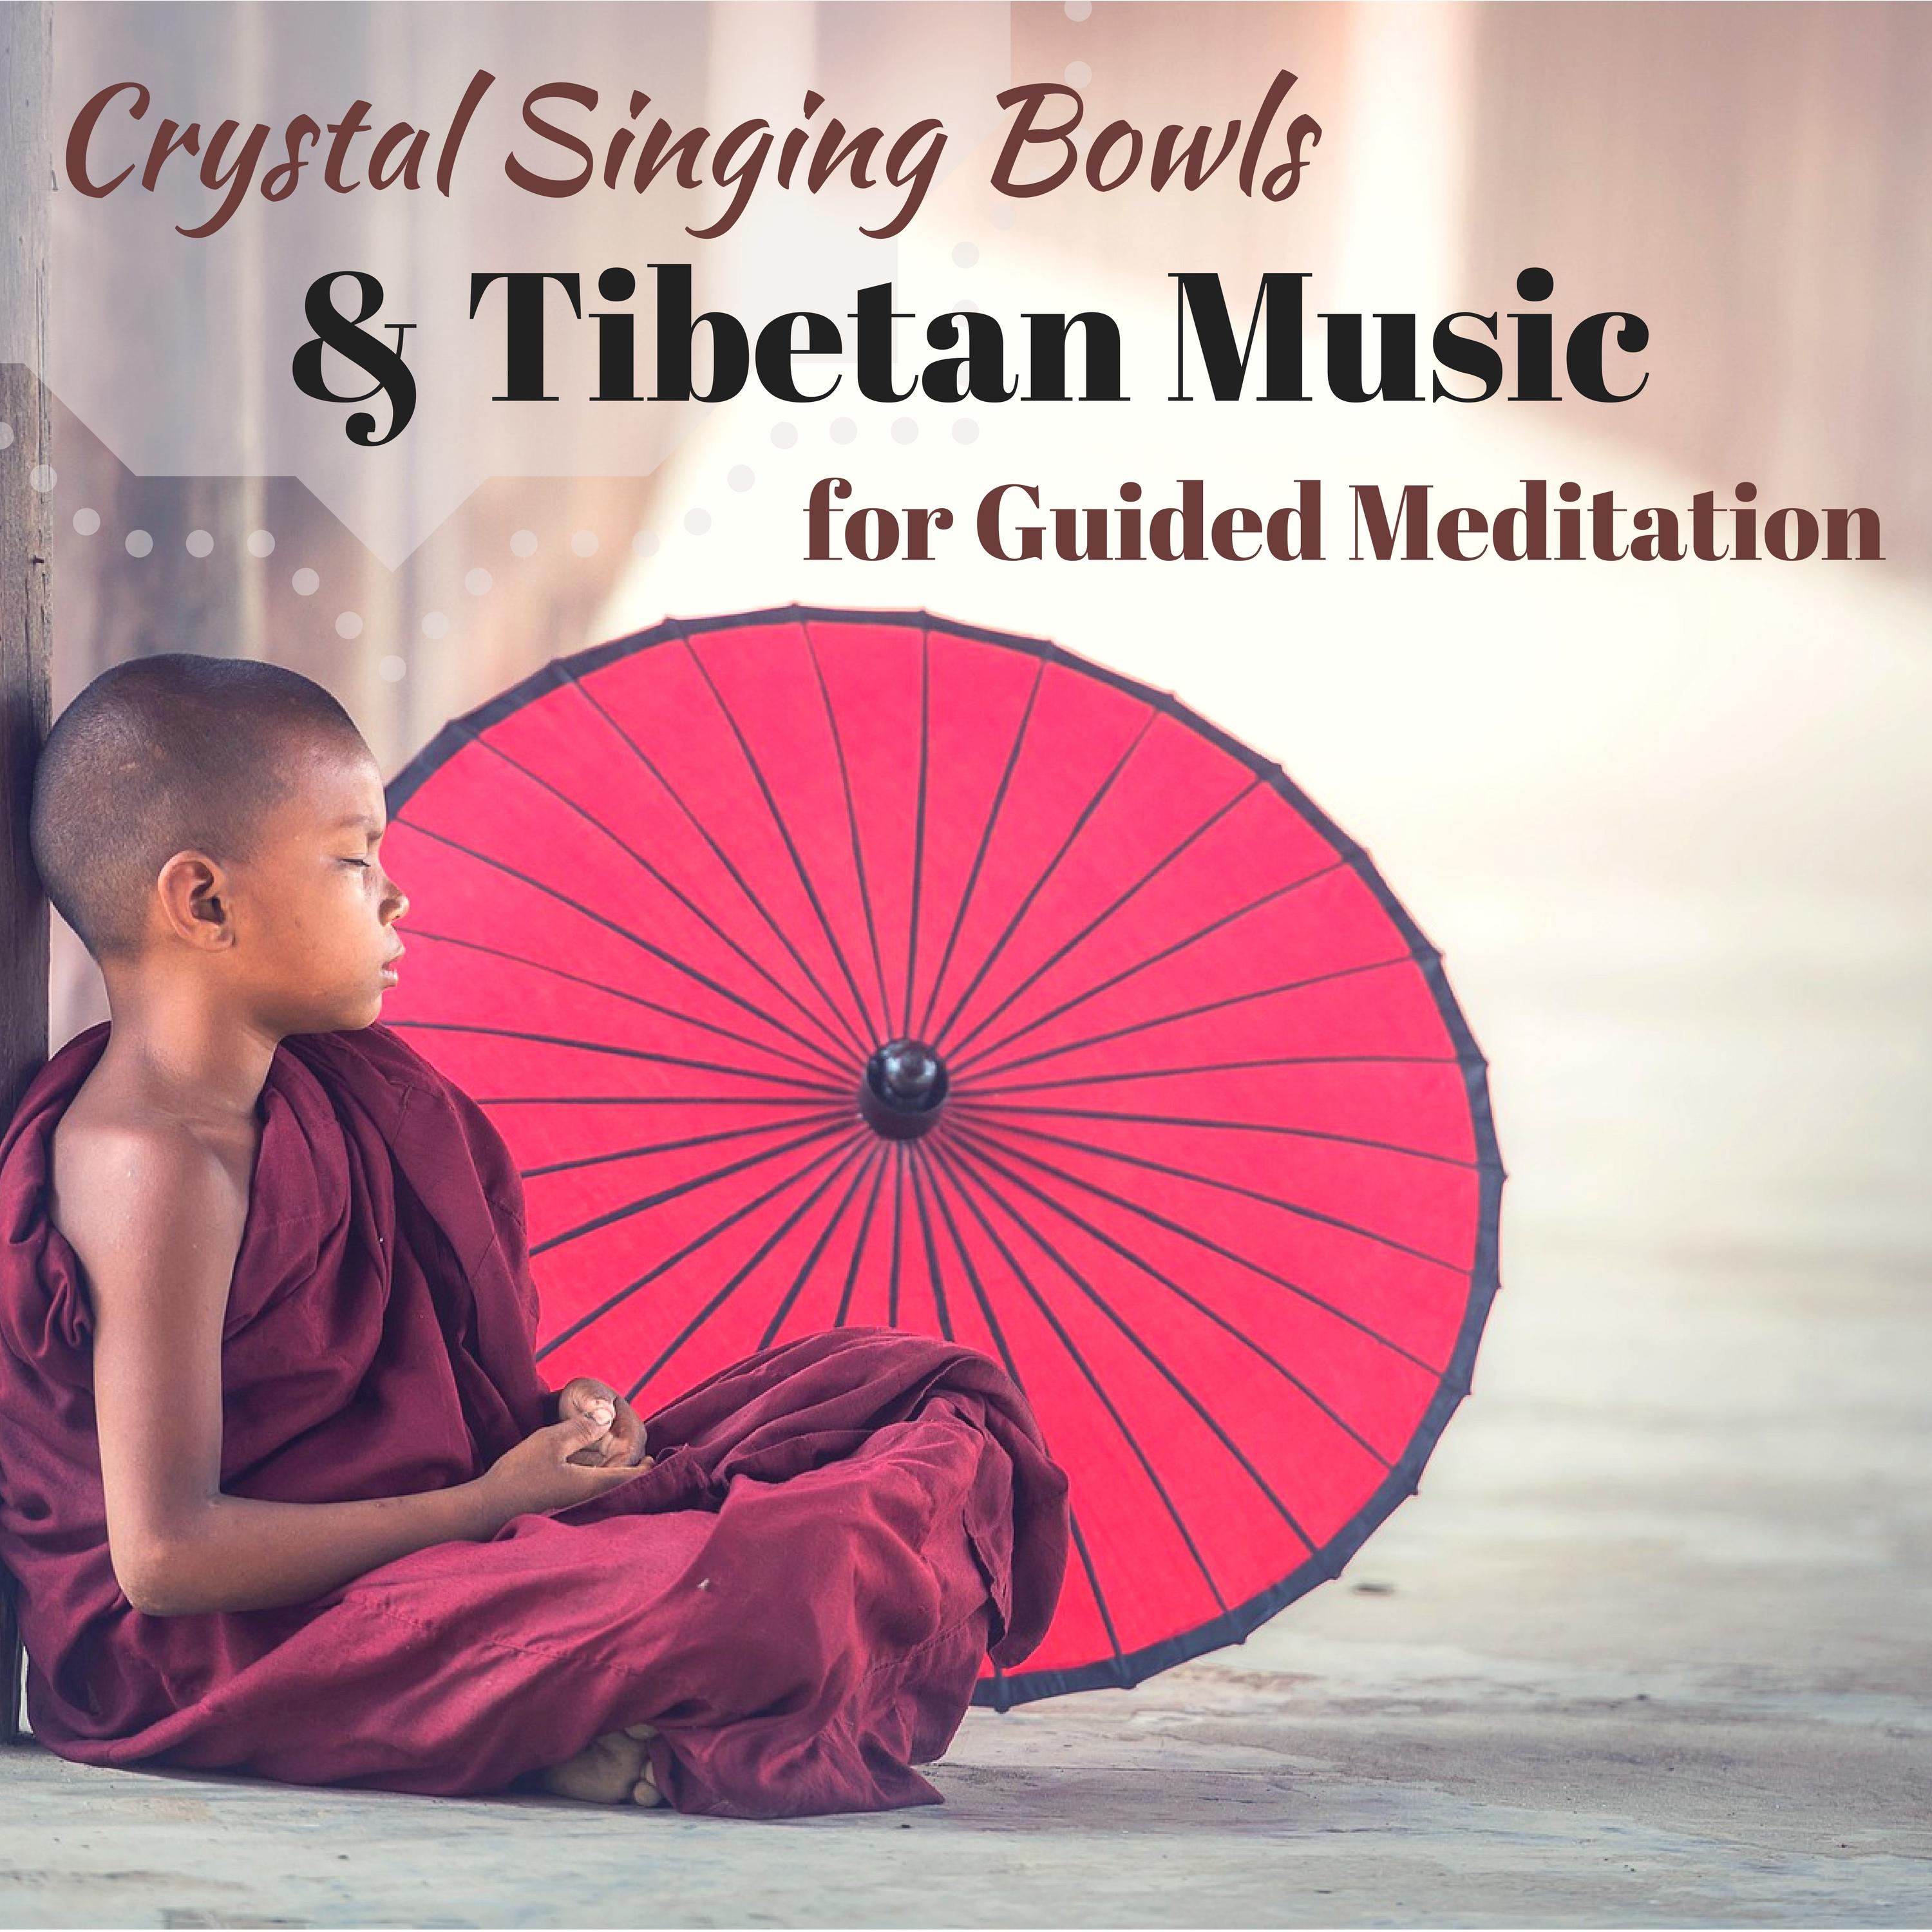 Crystal Singing Bowls & Tibetan Music for Guided Meditation: Healing Relaxation Sounds